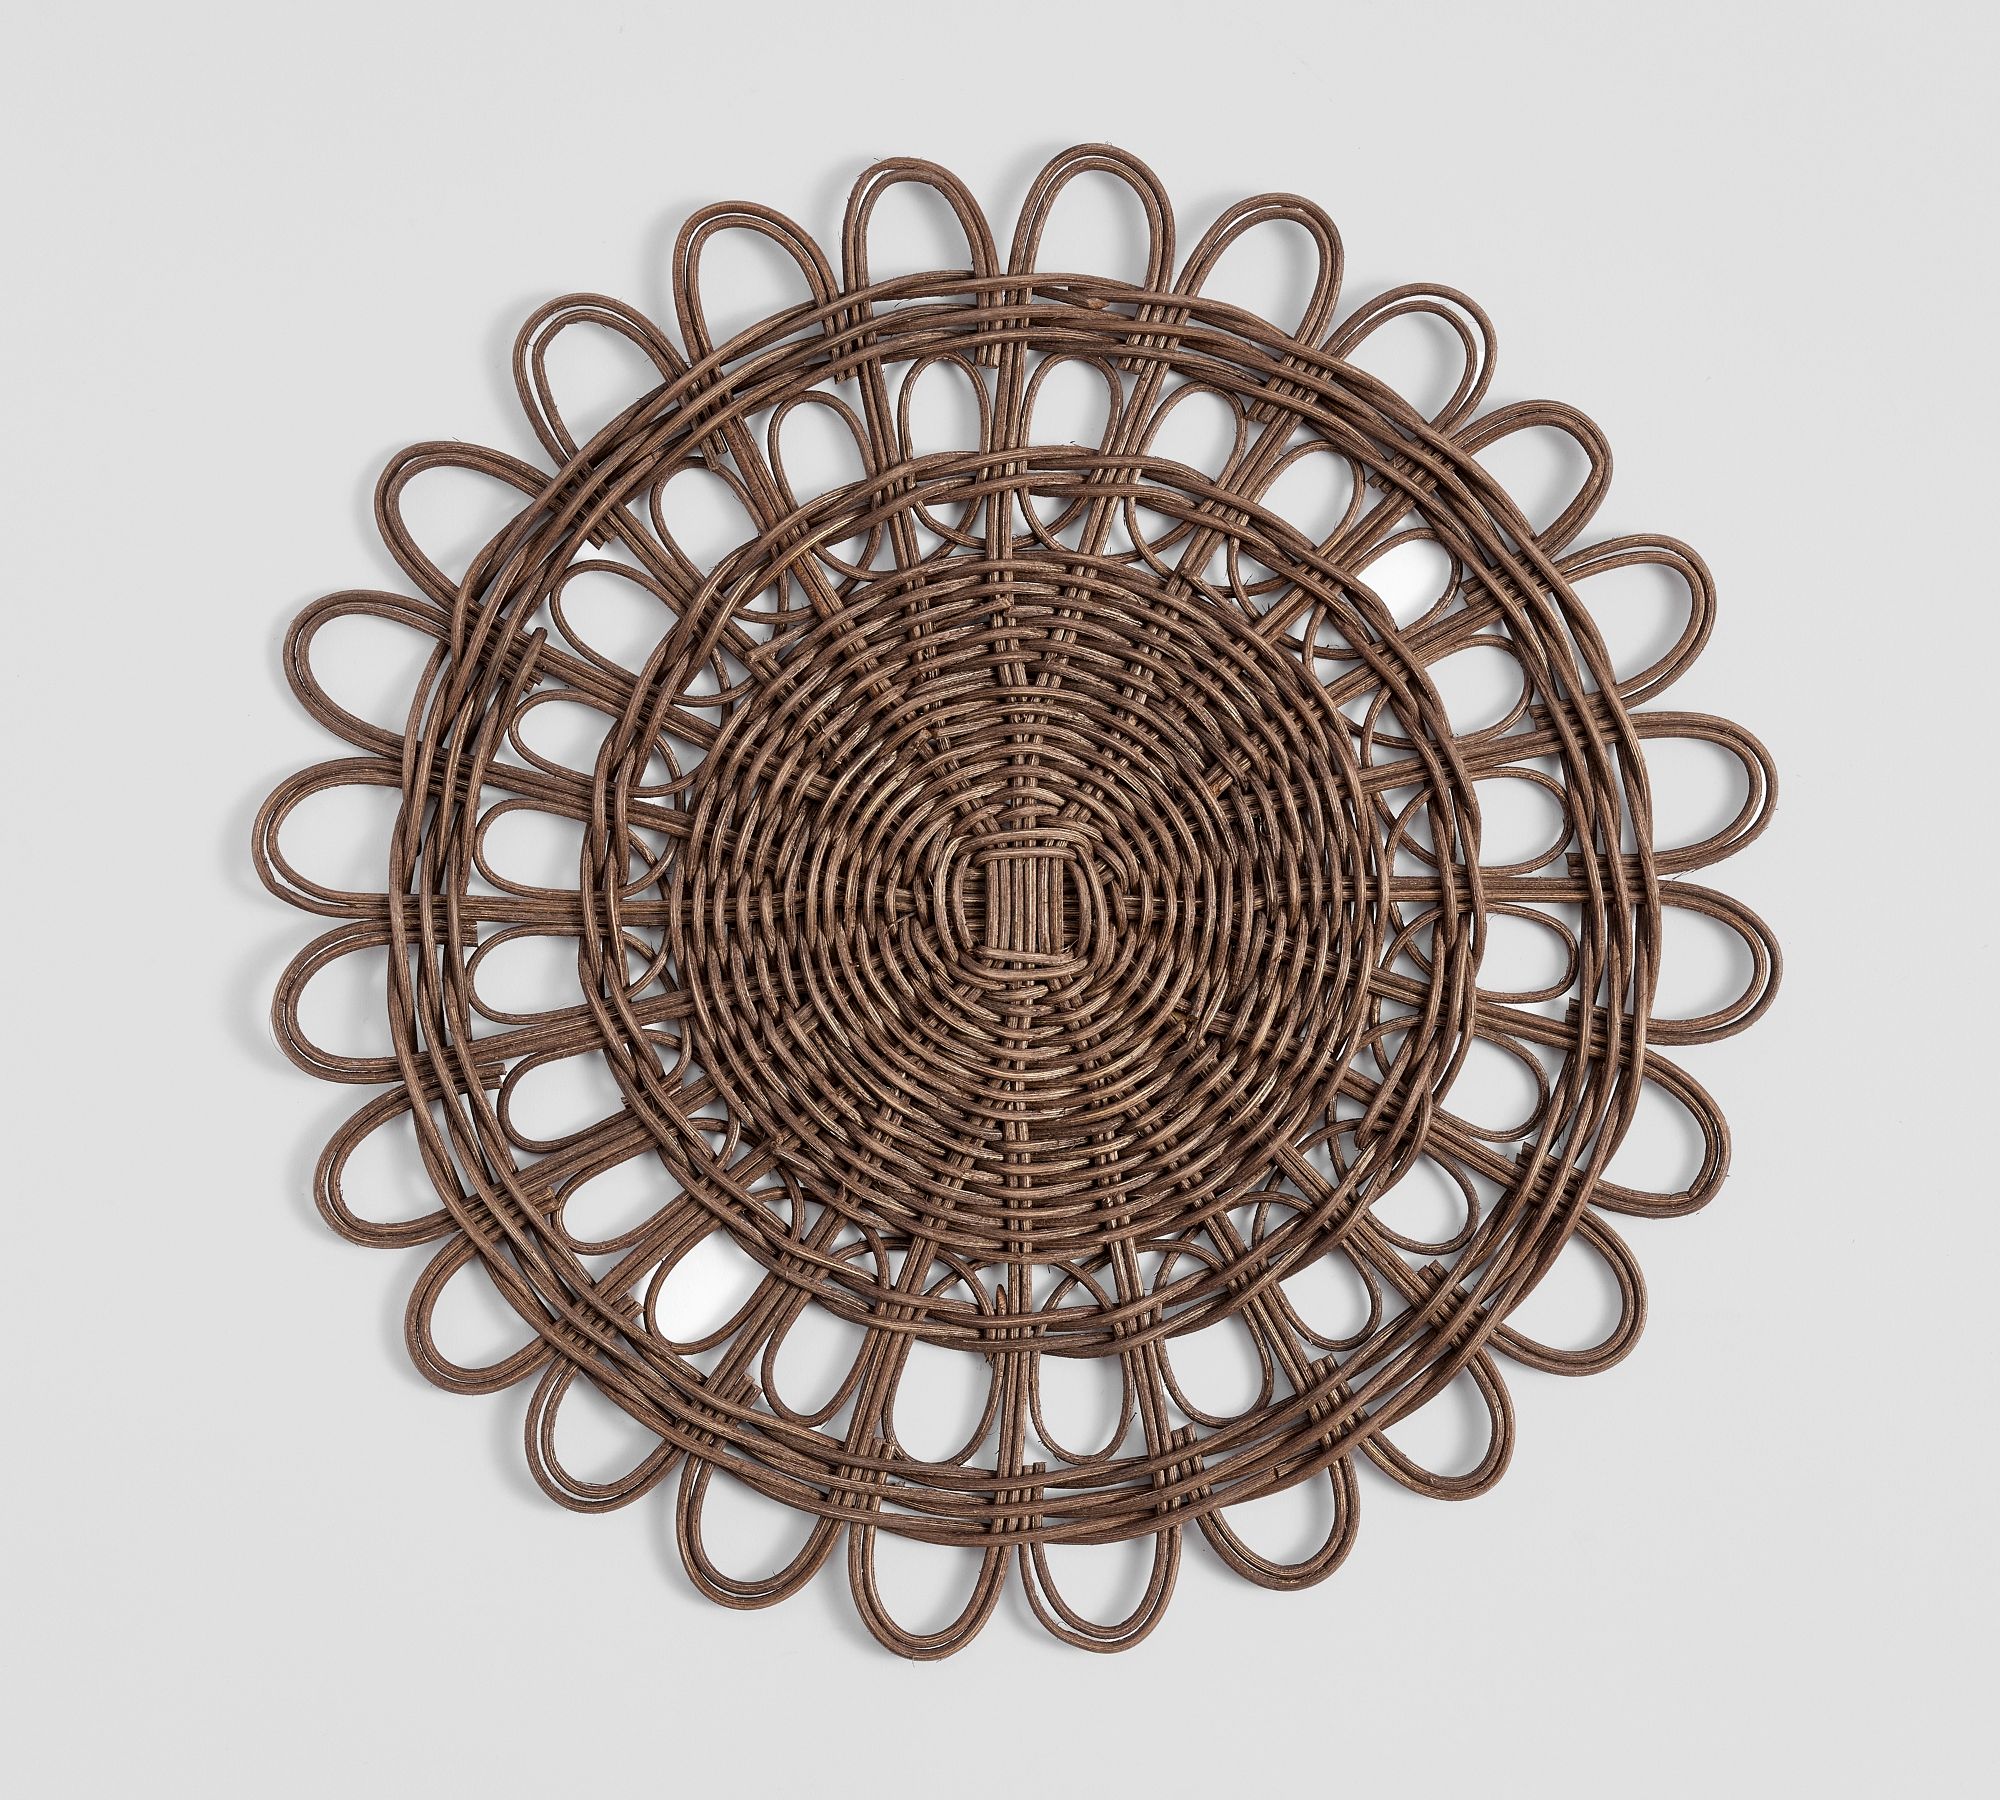 Wicker Weave Handwoven Rattan Charger Plate